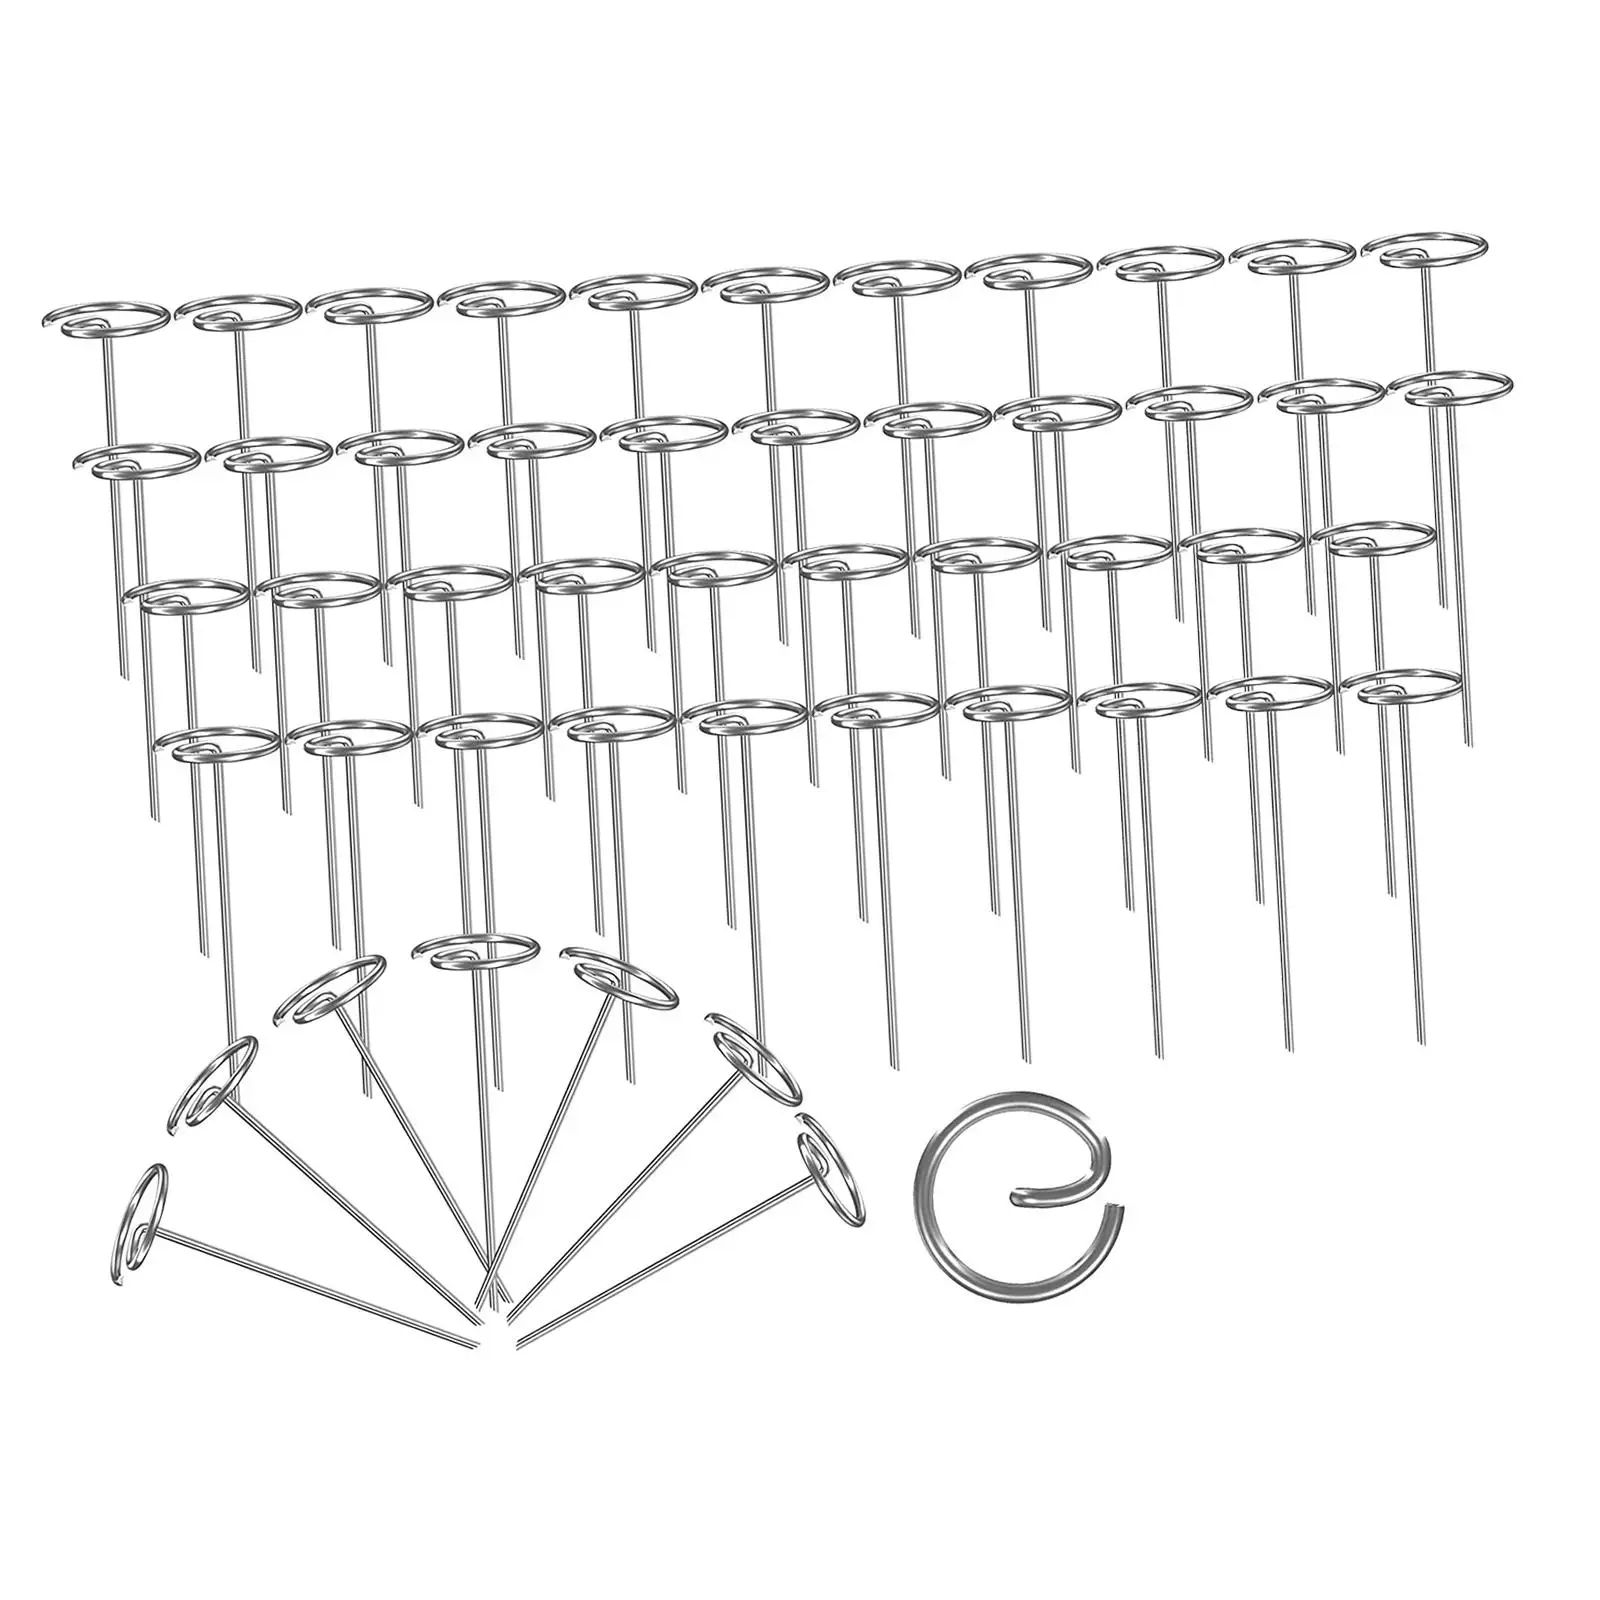 50Pcs Galvanized Steel Circle Top Pins Barrier Pins Landscape Pins Sod Staples for Landscaping Barrier Garden Yard Fabric